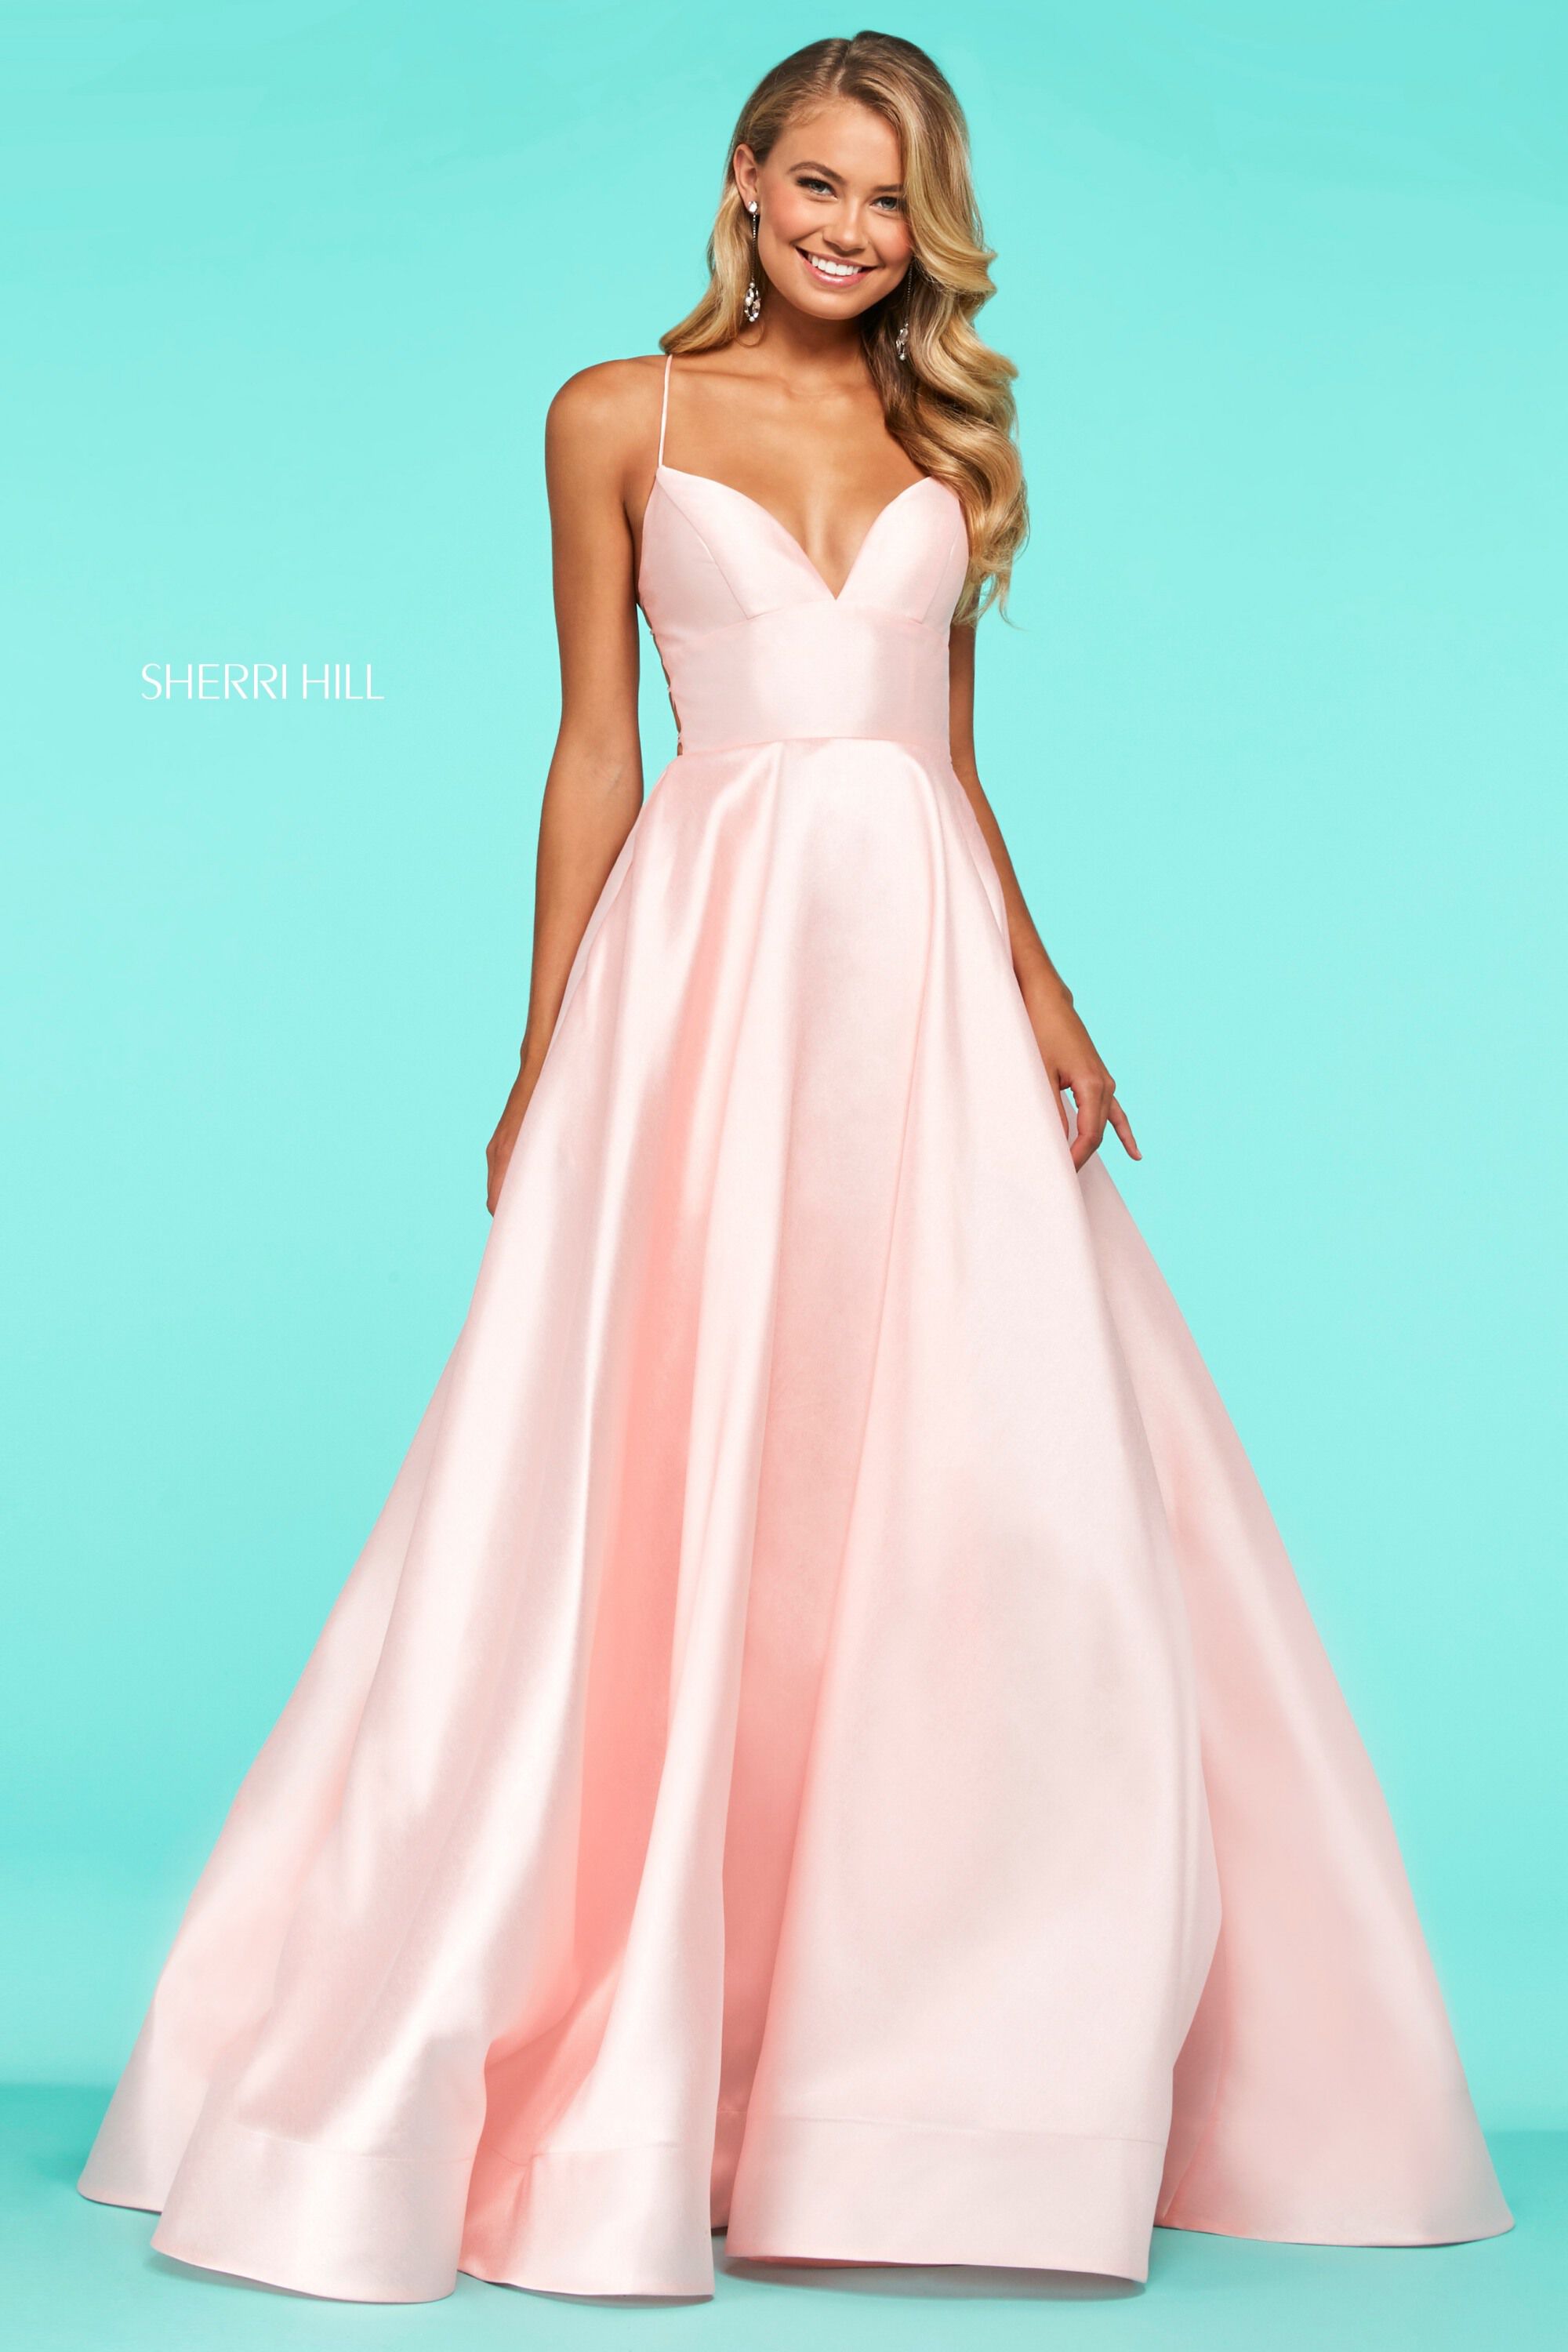 style № 53661 designed by SherriHill